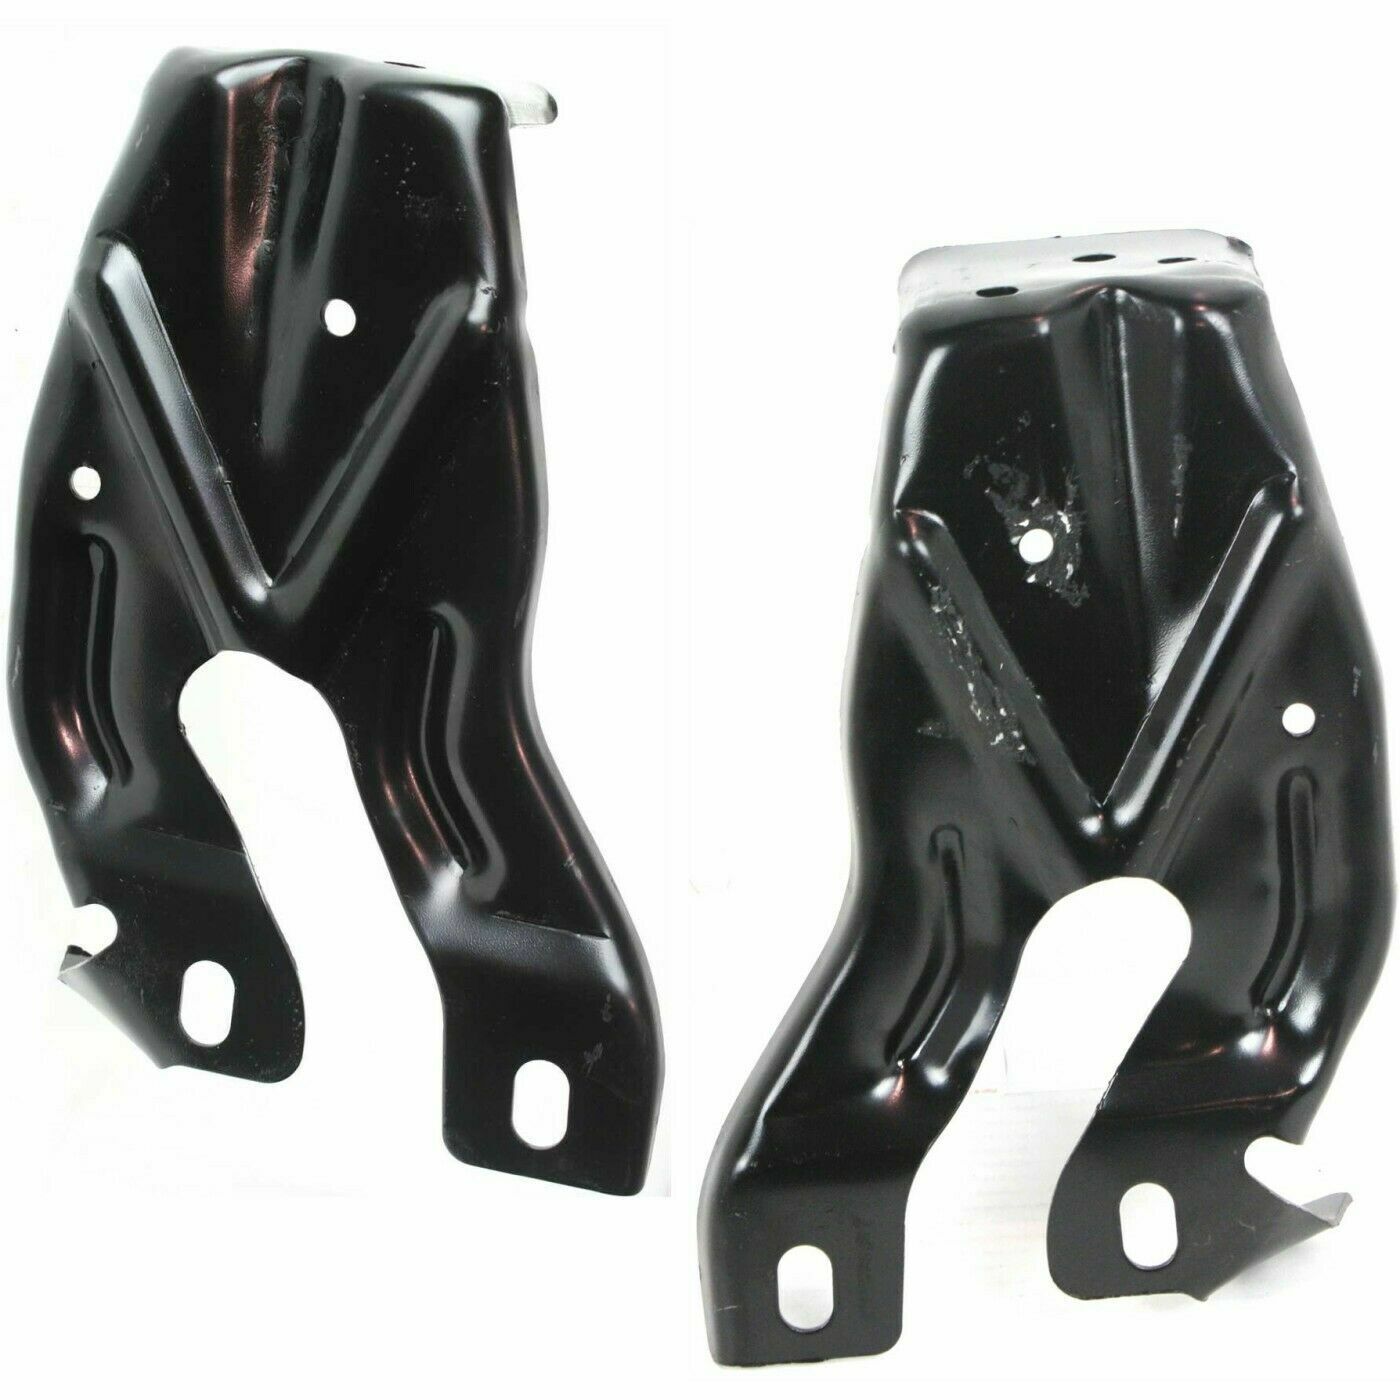 New Front Bumper Mounting Bracket Set For 1998-2004 Frontier 2000-2004 Xterra